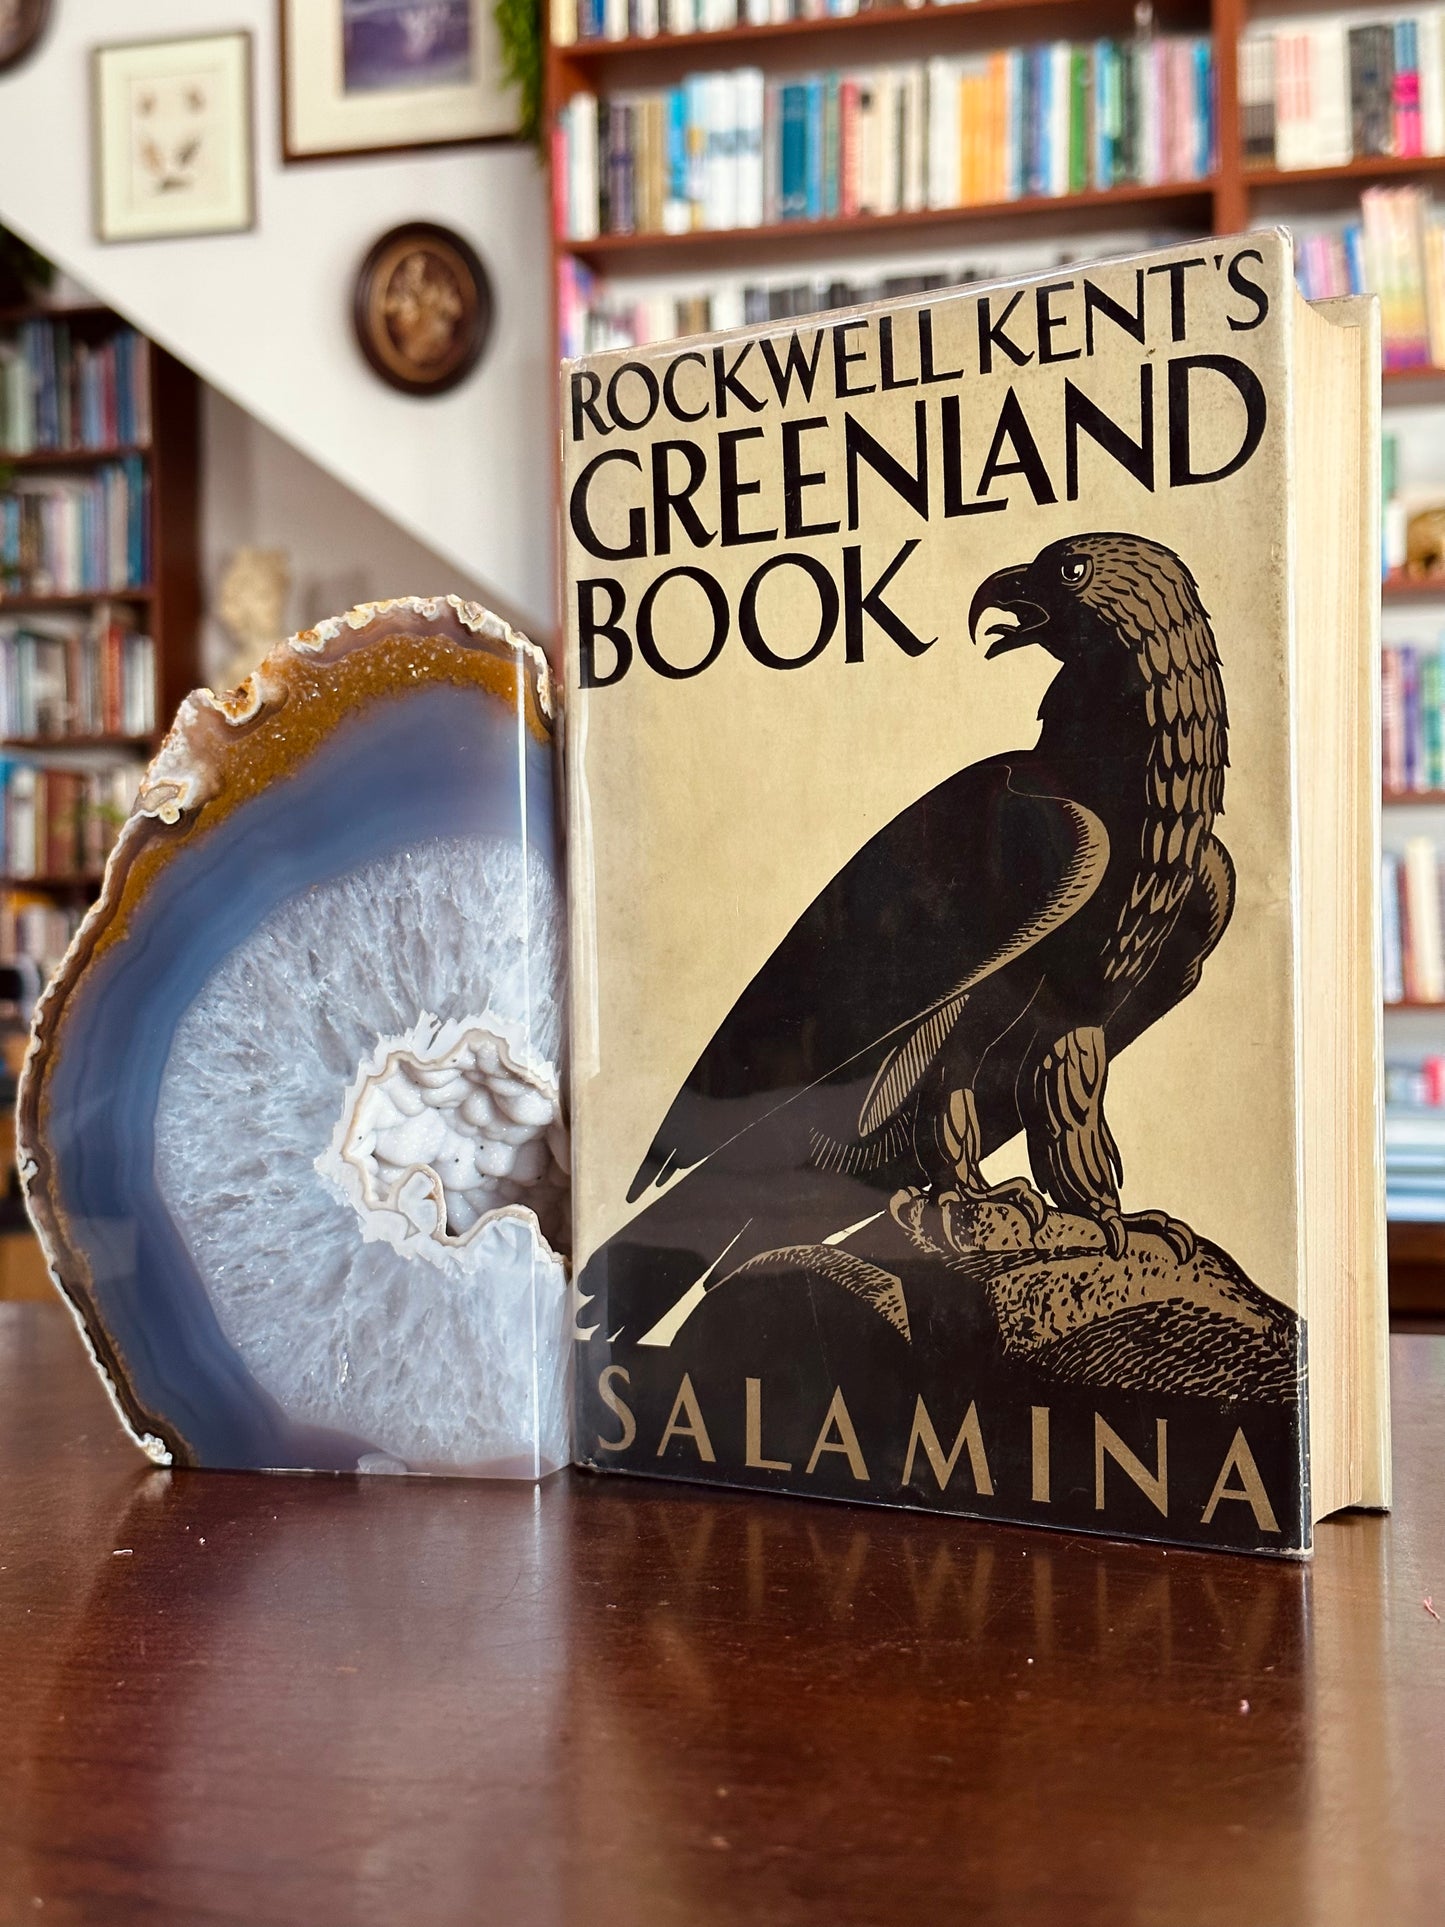 Rockwell Kent’s Greenland Book (First Edition)